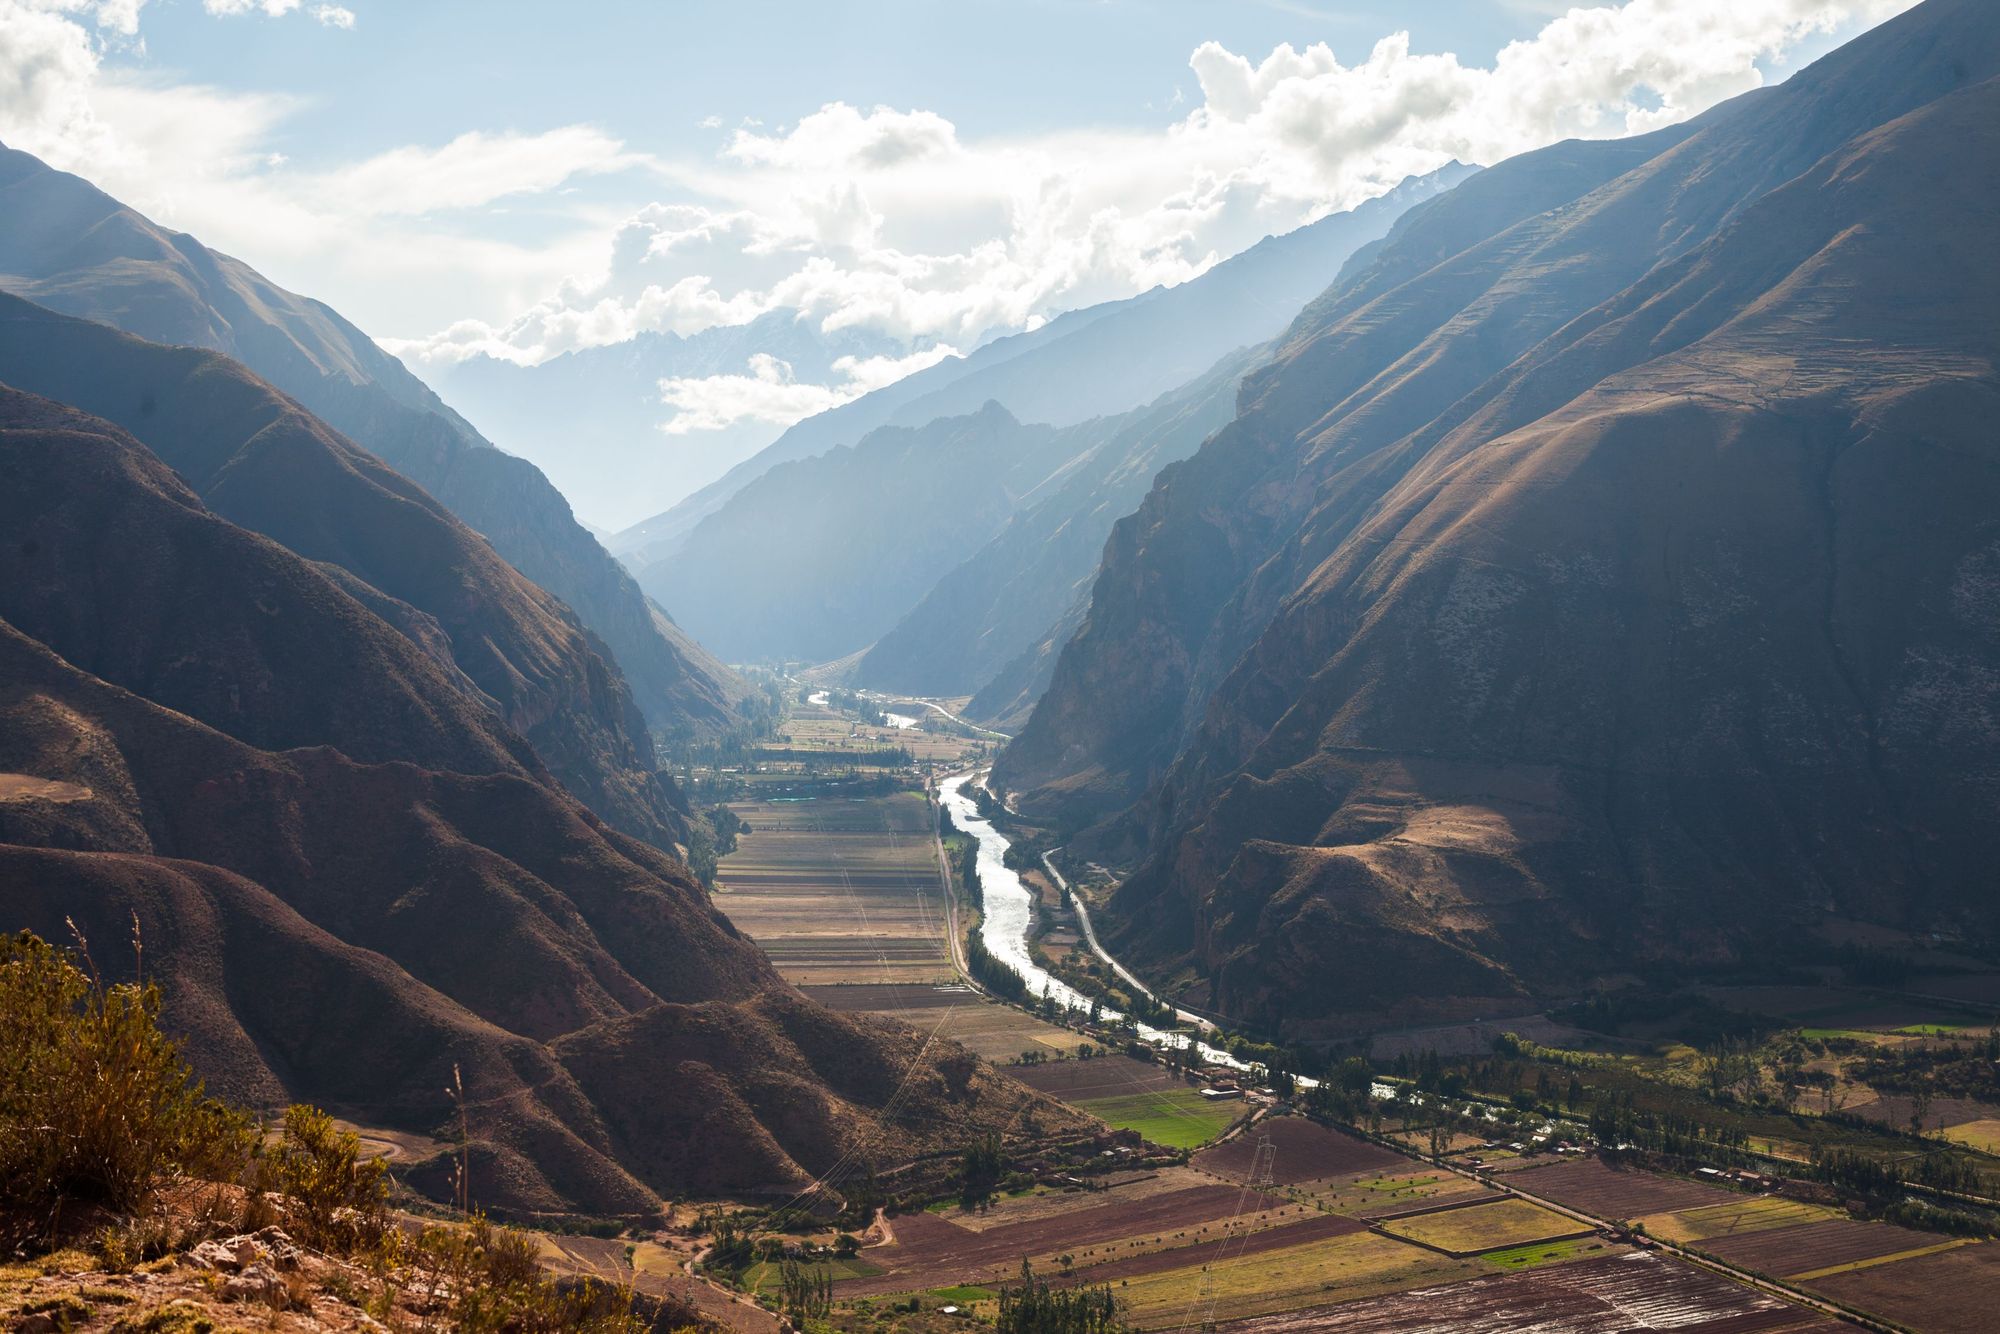 El Valle Sagrado - the Sacred Valley - in Peru, with a view of the town of Urubamba. Photo: Getty